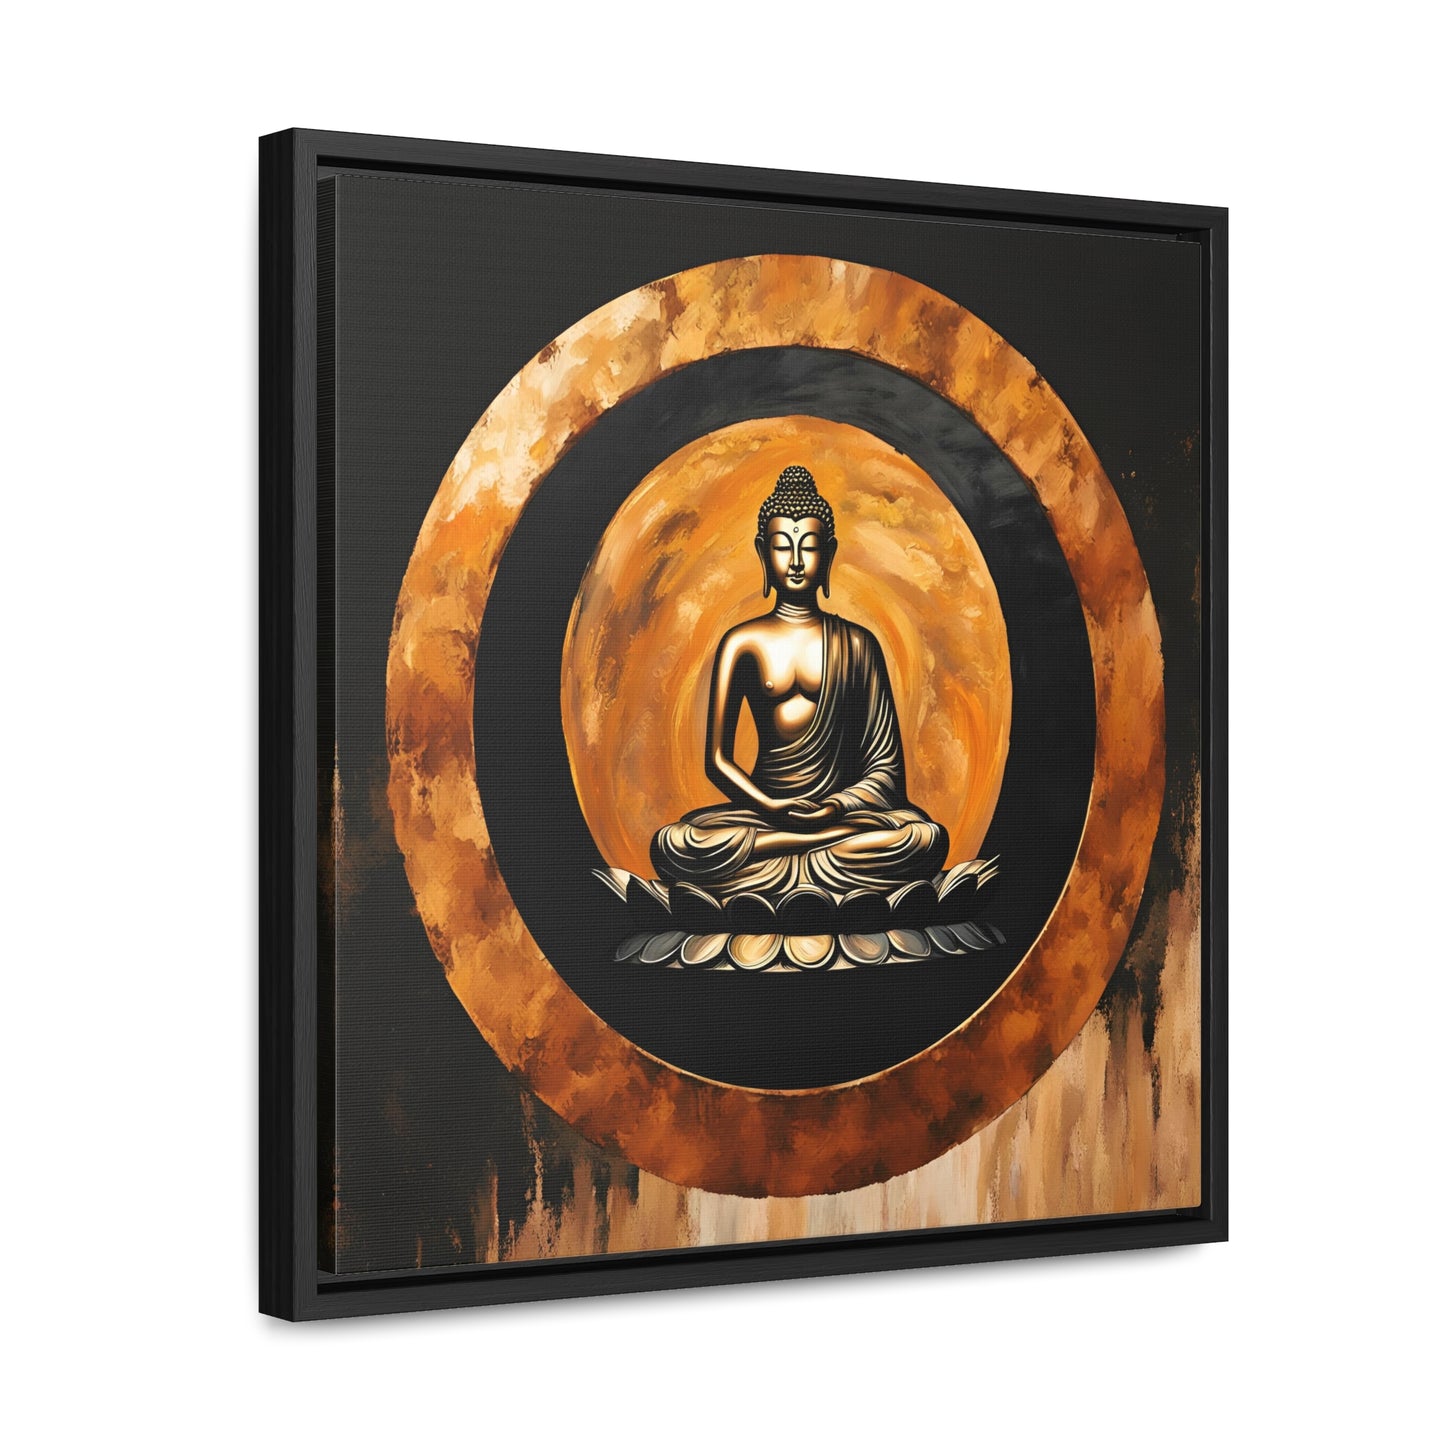 Golden Sitting Buddha in a Gold Enso Circle Print on Canvas in a Floating Frame - Spiritual and Meditation Wall Decor